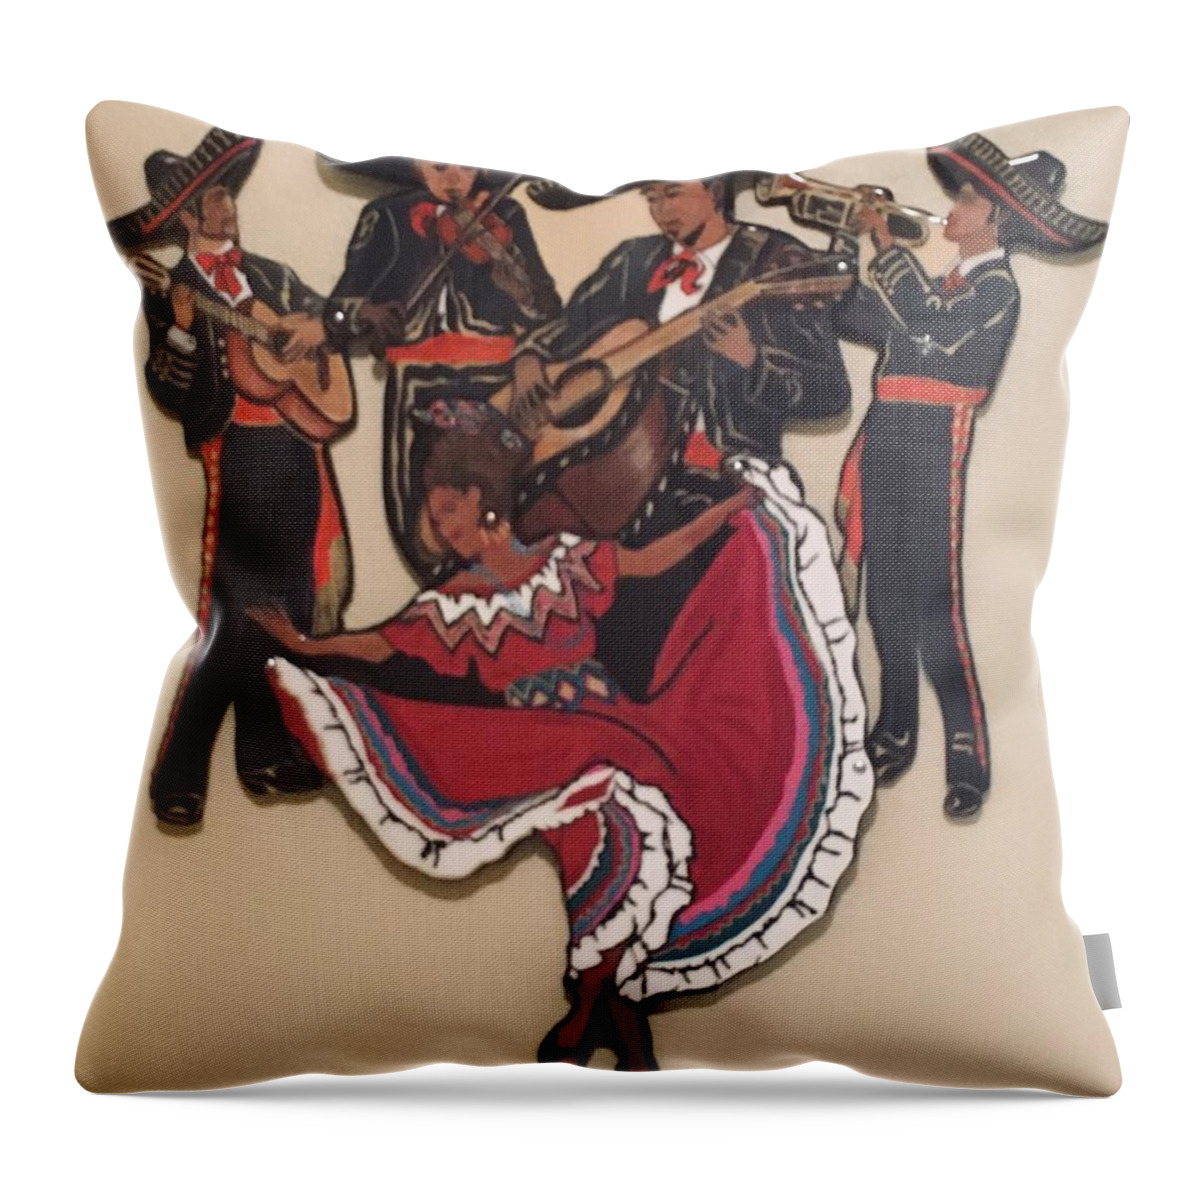 Mariachi Musicians Throw Pillow featuring the mixed media Mariachis and Folklorico Dancer by Bill Manson